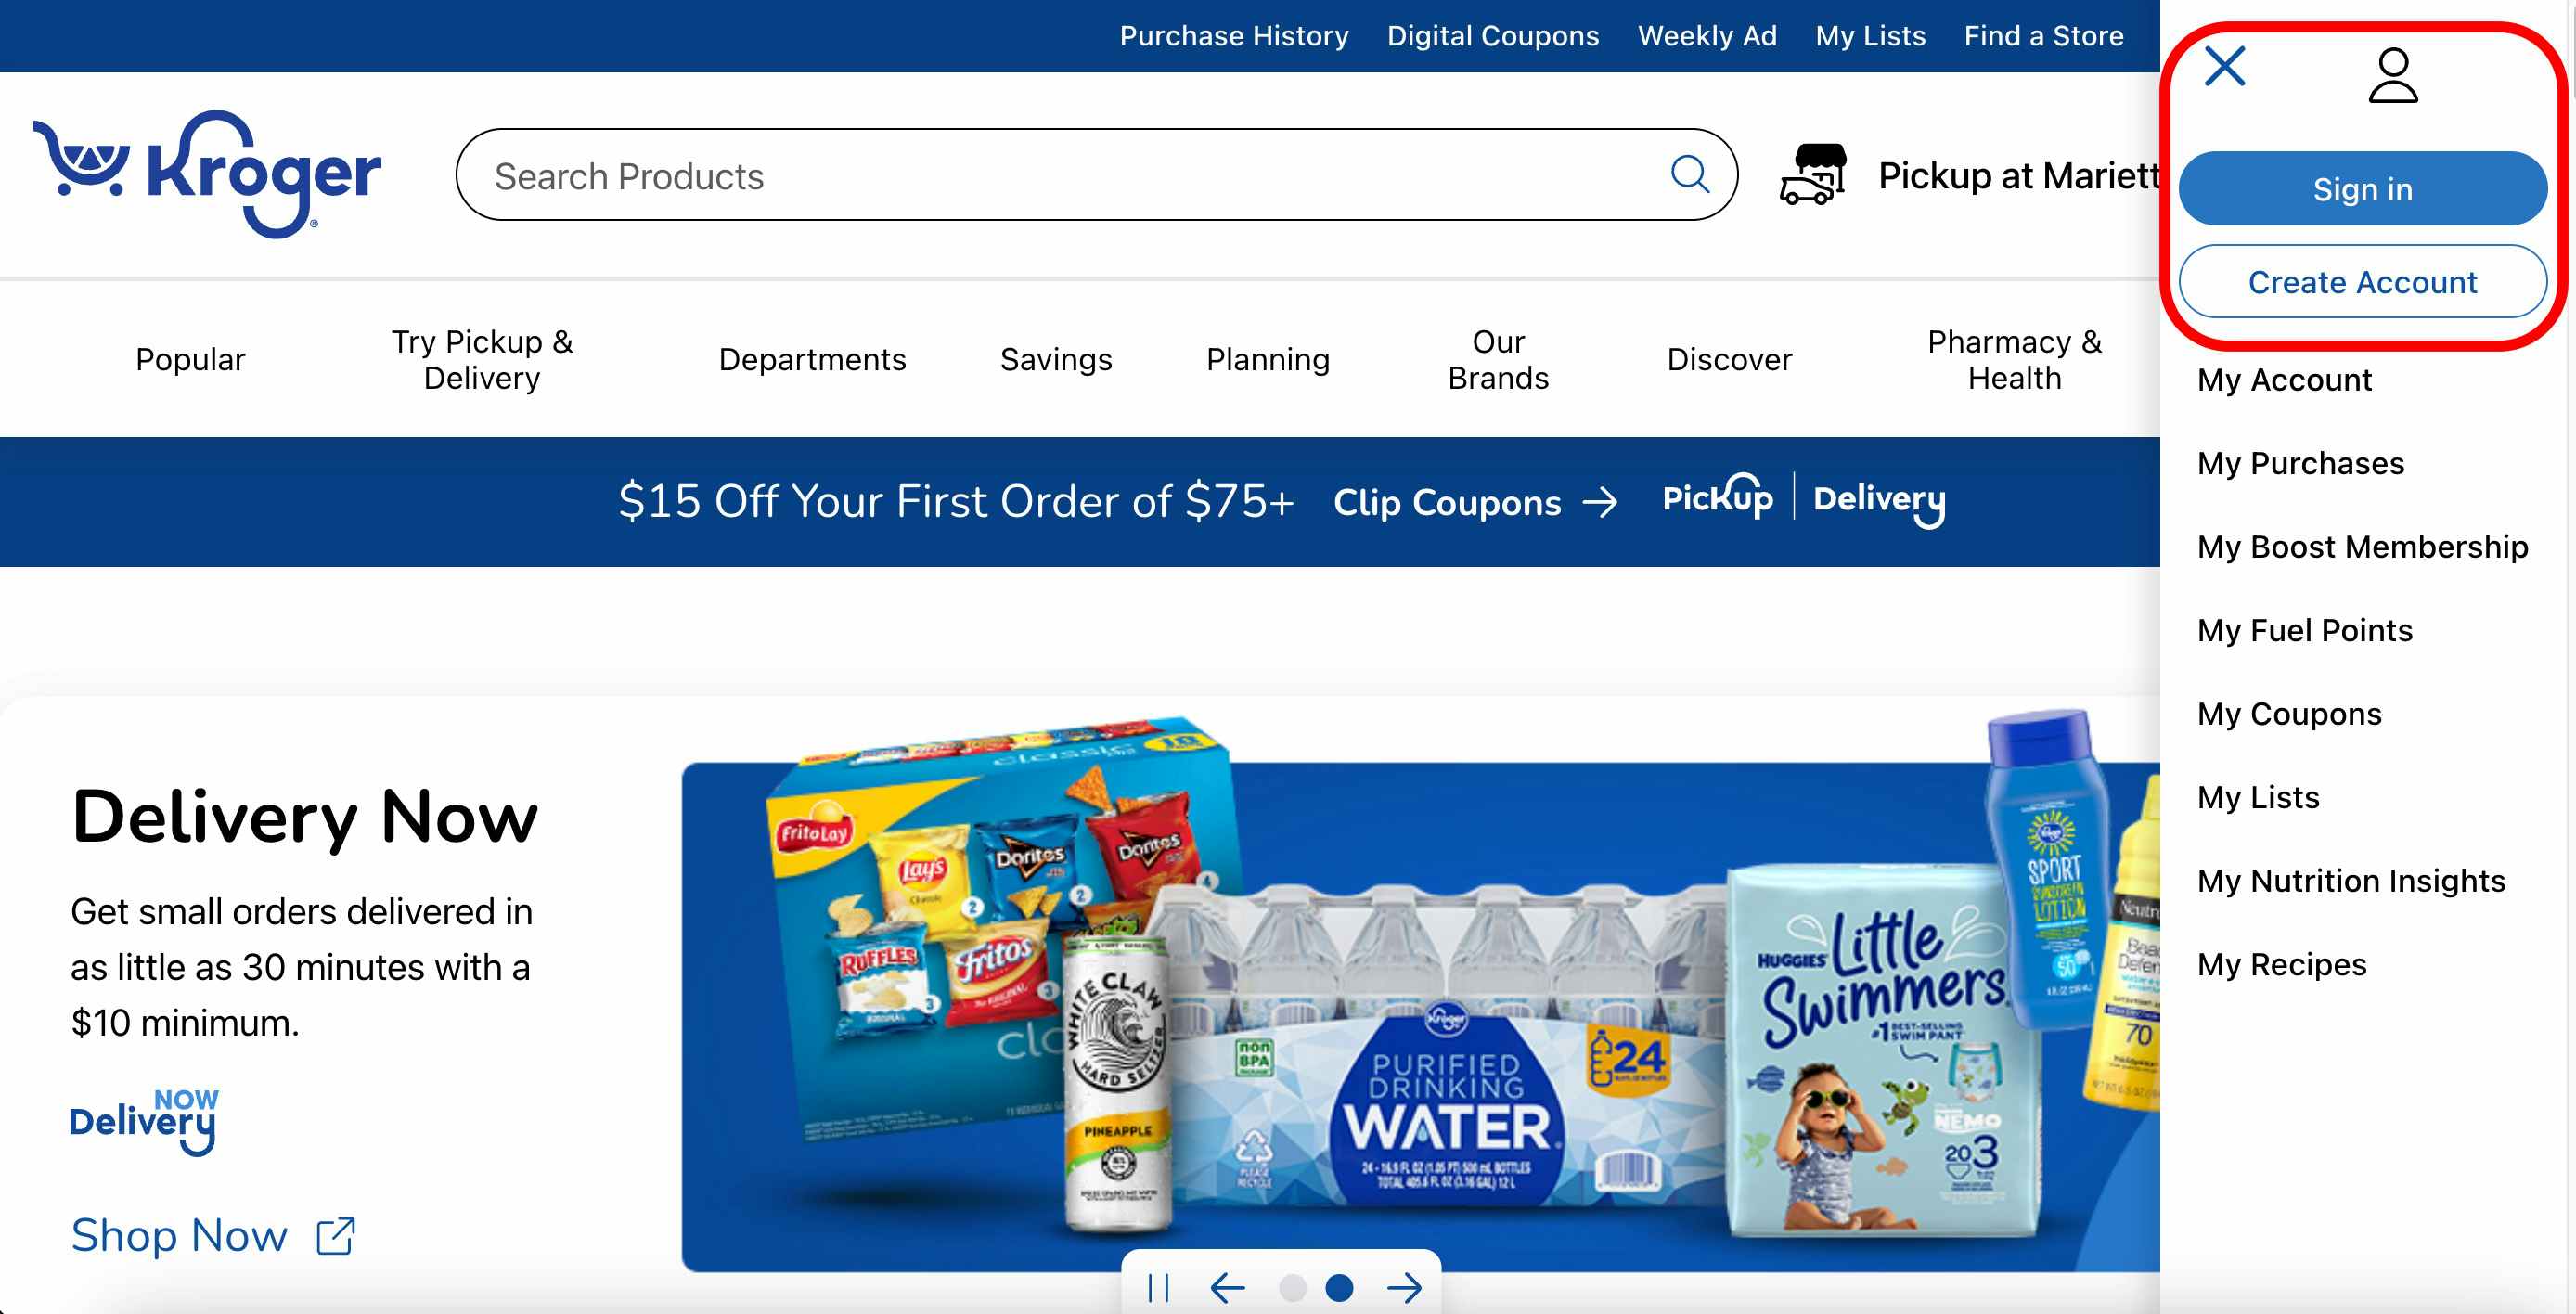 A screenshot of the Kroger website showing where to sign in or create an account